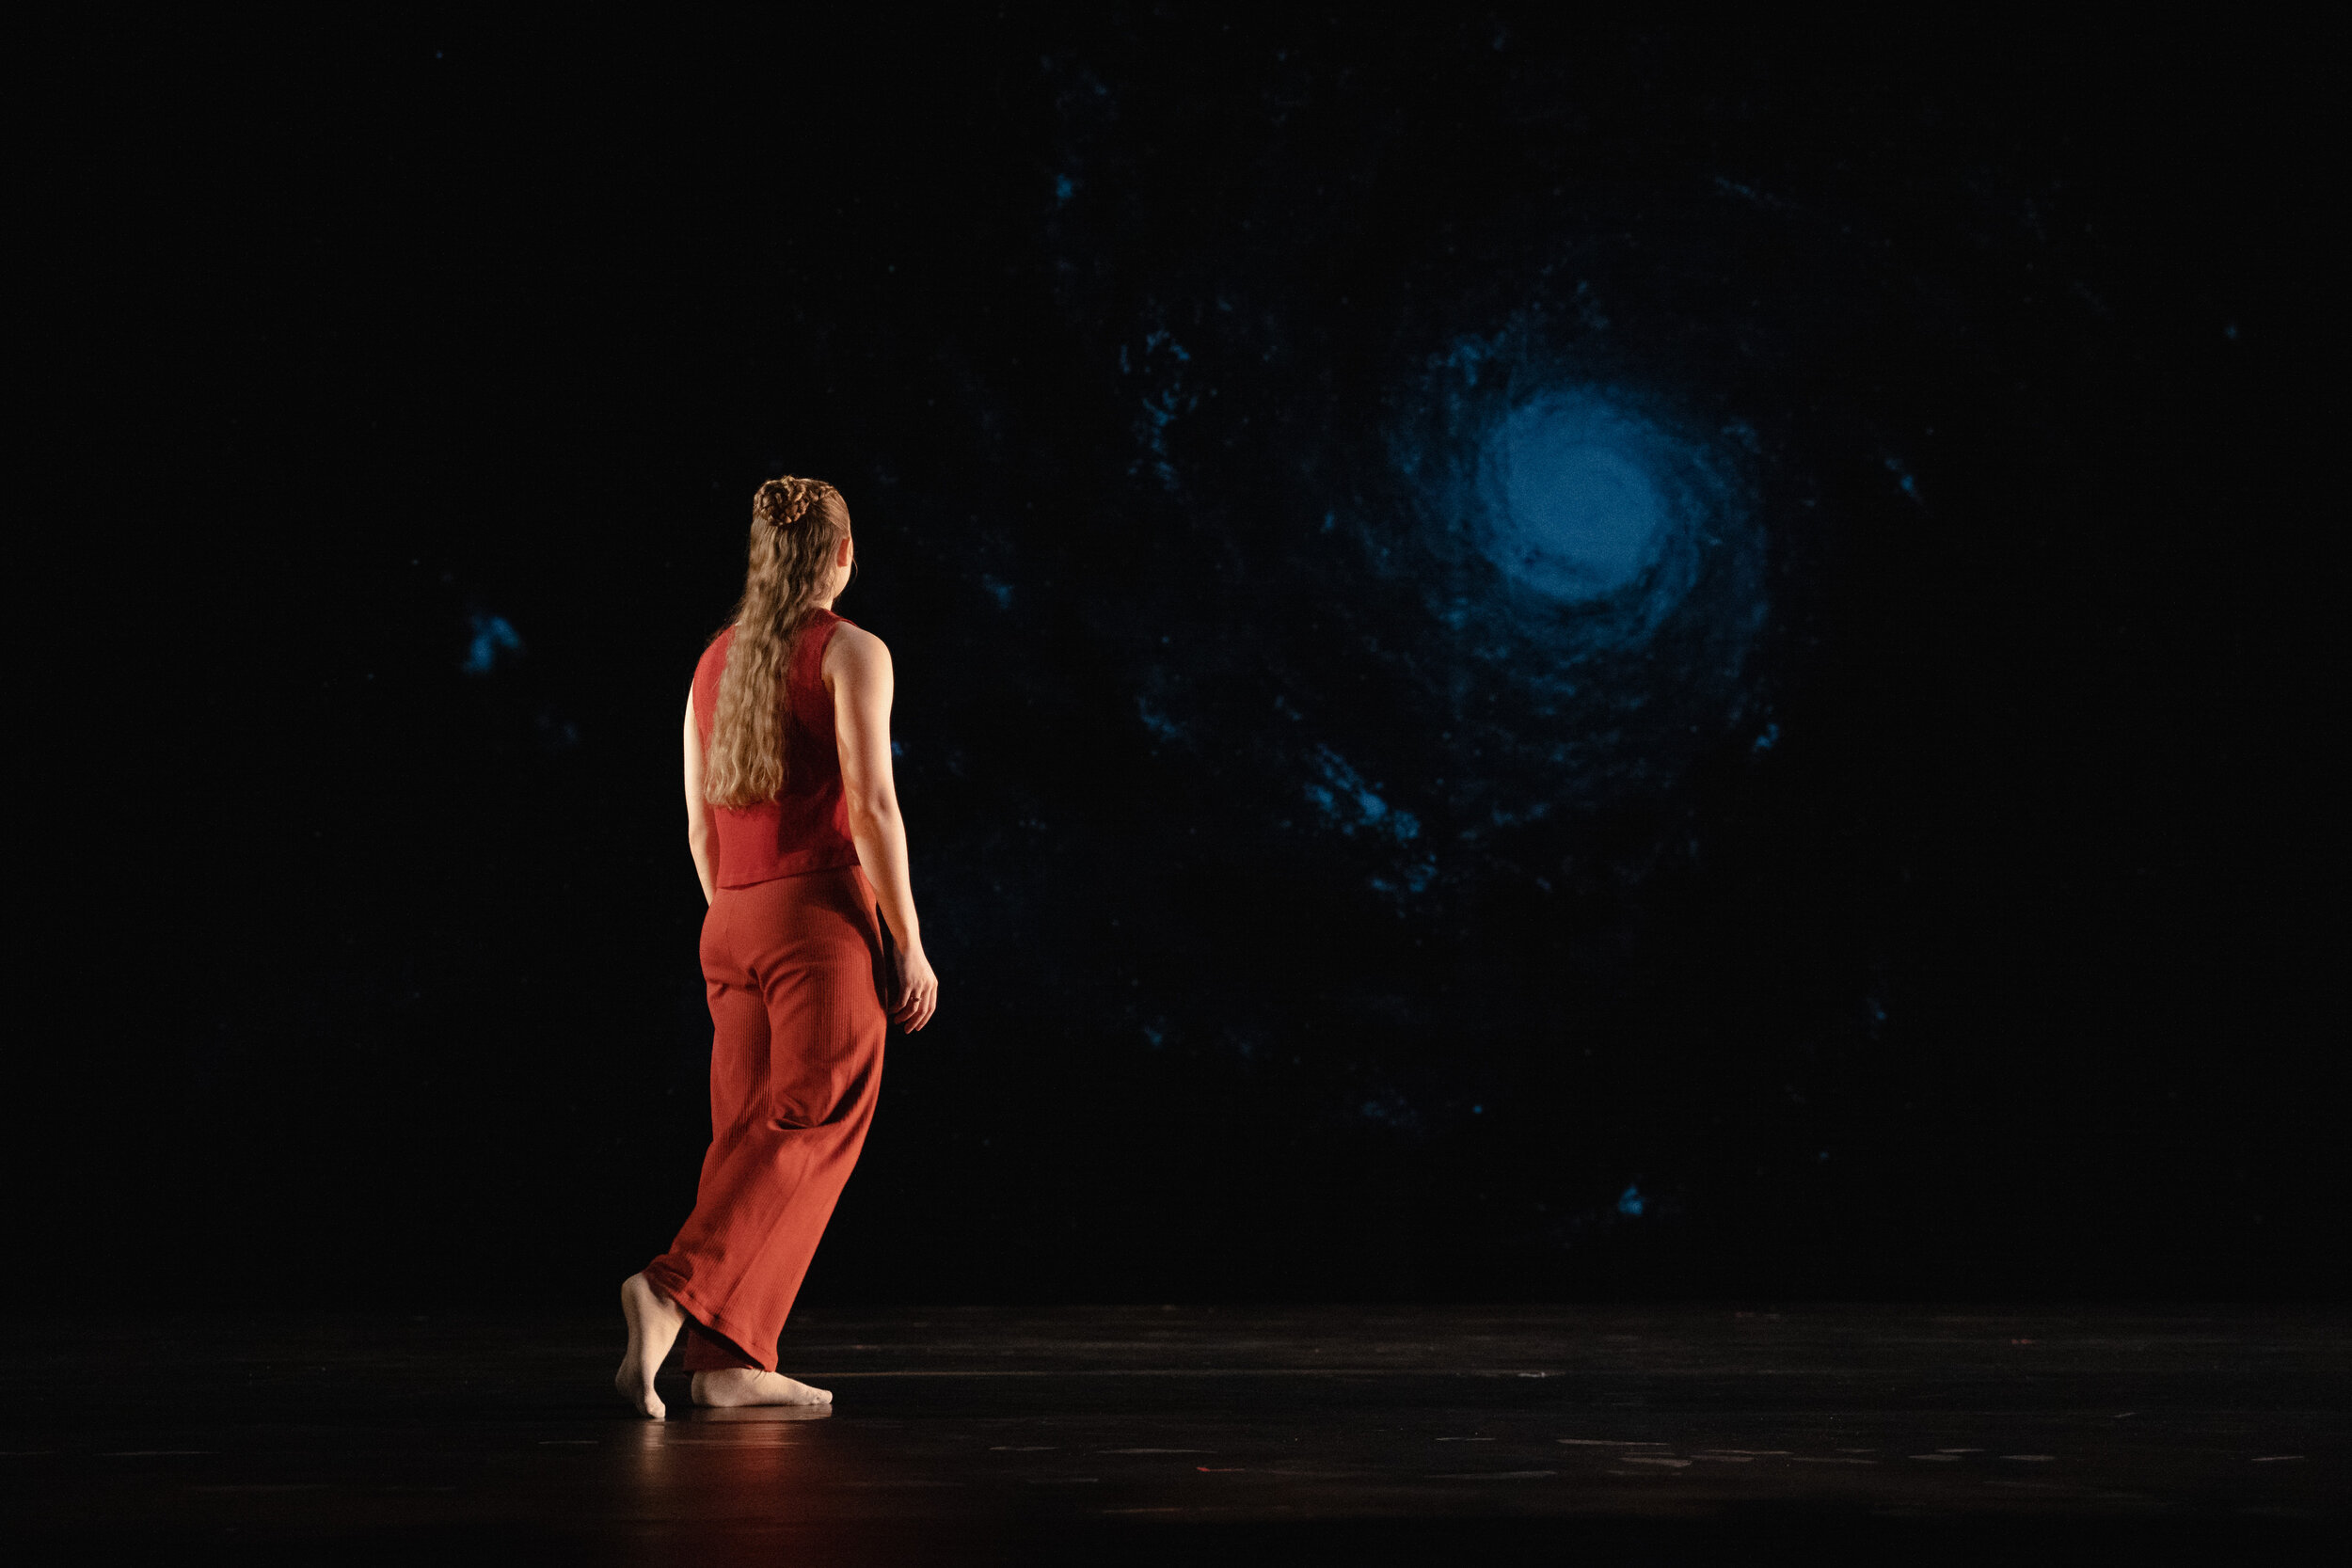  Photography by Benjamin Lappalainen Pictured: Kathleen Pick Choreography by Joel Taylor Costume Design by Alessia Urbani Lighting Design by Emerson Kafarowski Projection Design by Sam Skynner 